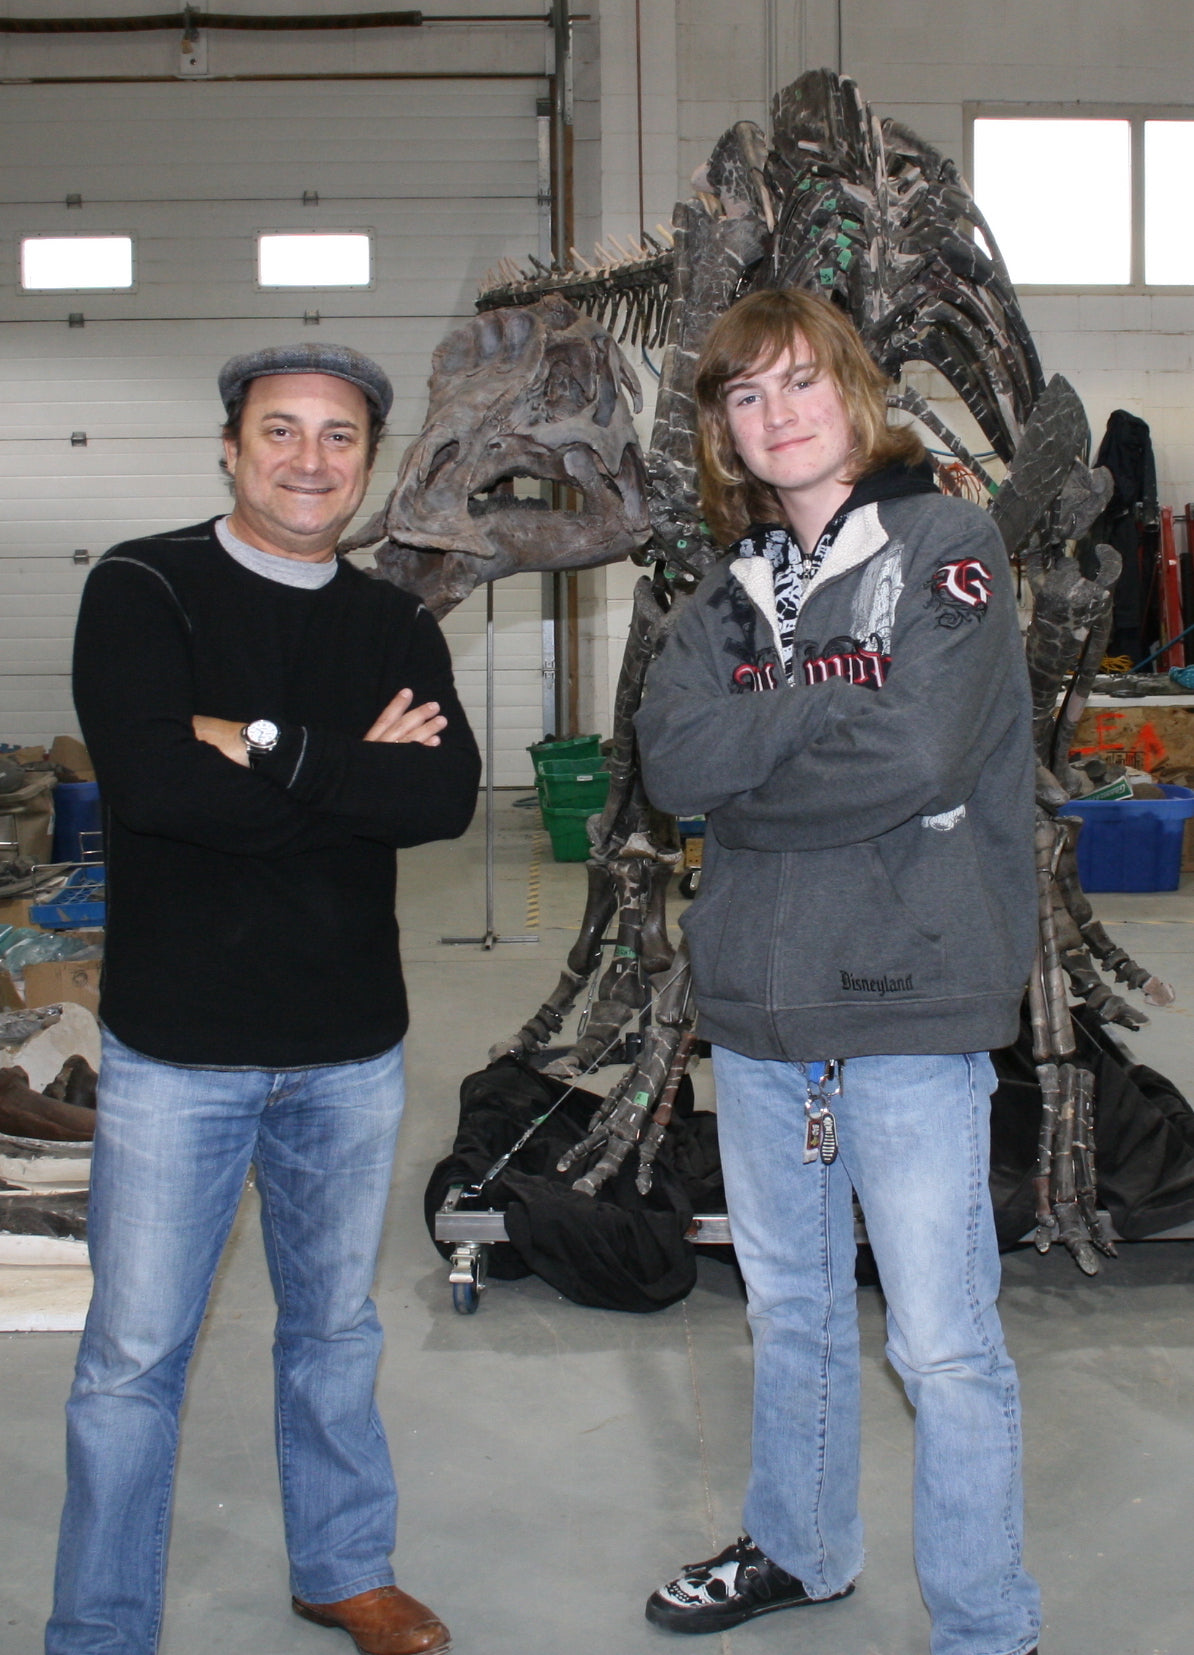 Maiasaura peeblesorum  Kevin Pollak, a big dinosaur lover, came for a tour of our formerly private lab. In the background is a duckbill dinosaur, Maiasaura.      (approx. 70 million years old)